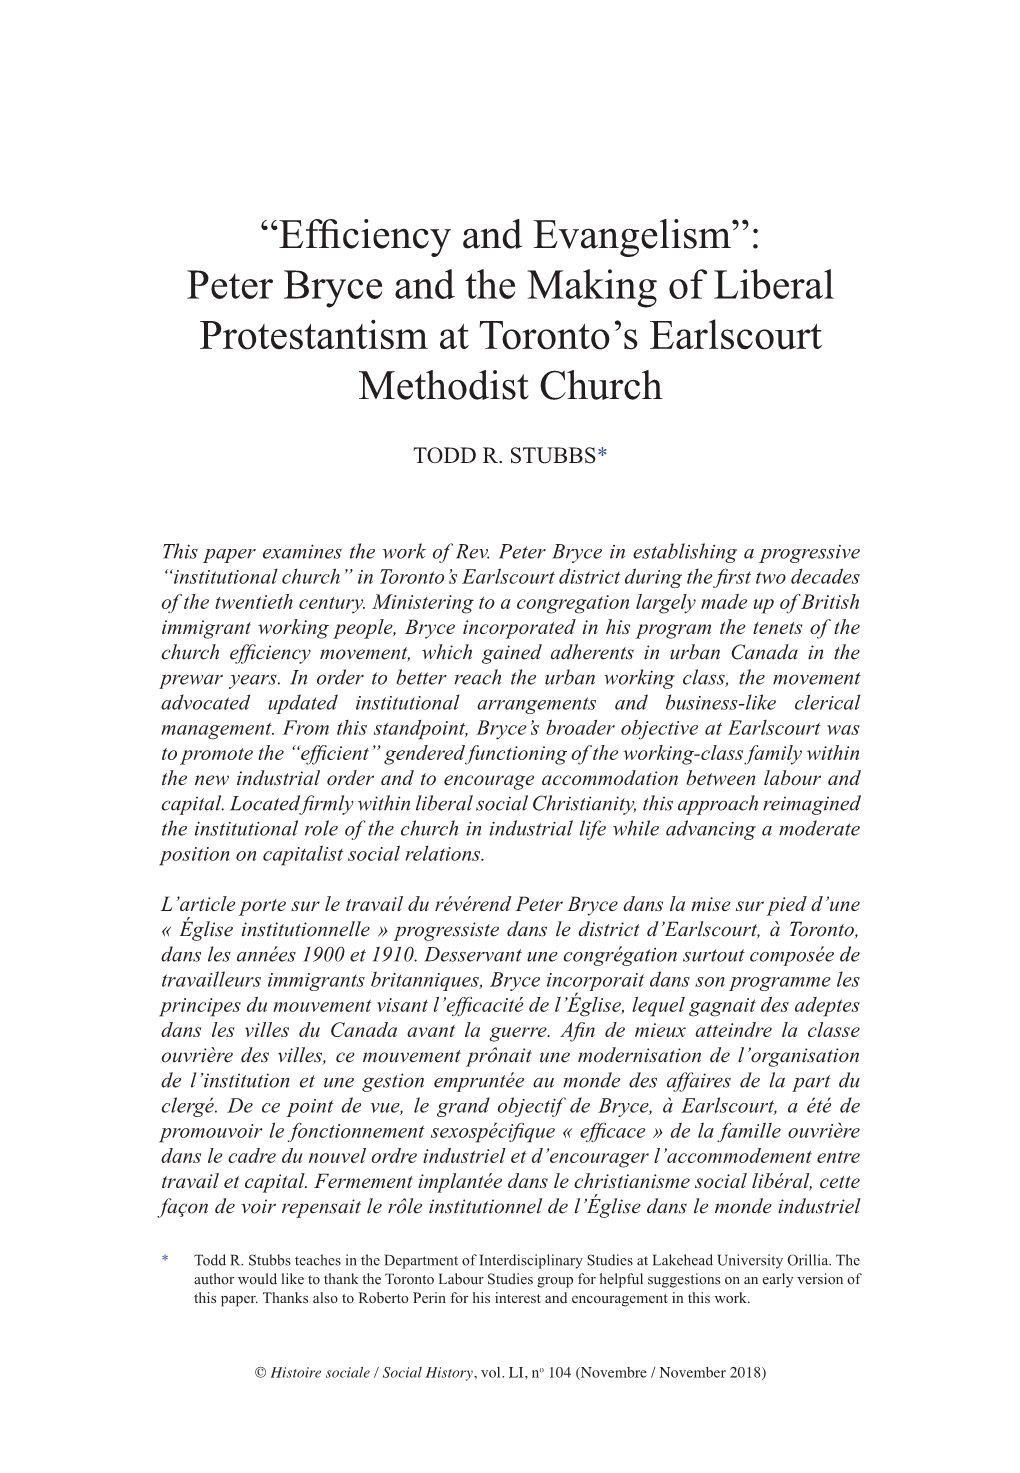 “Efficiency and Evangelism”: Peter Bryce and the Making of Liberal Protestantism at Toronto's Earlscourt Methodist Church